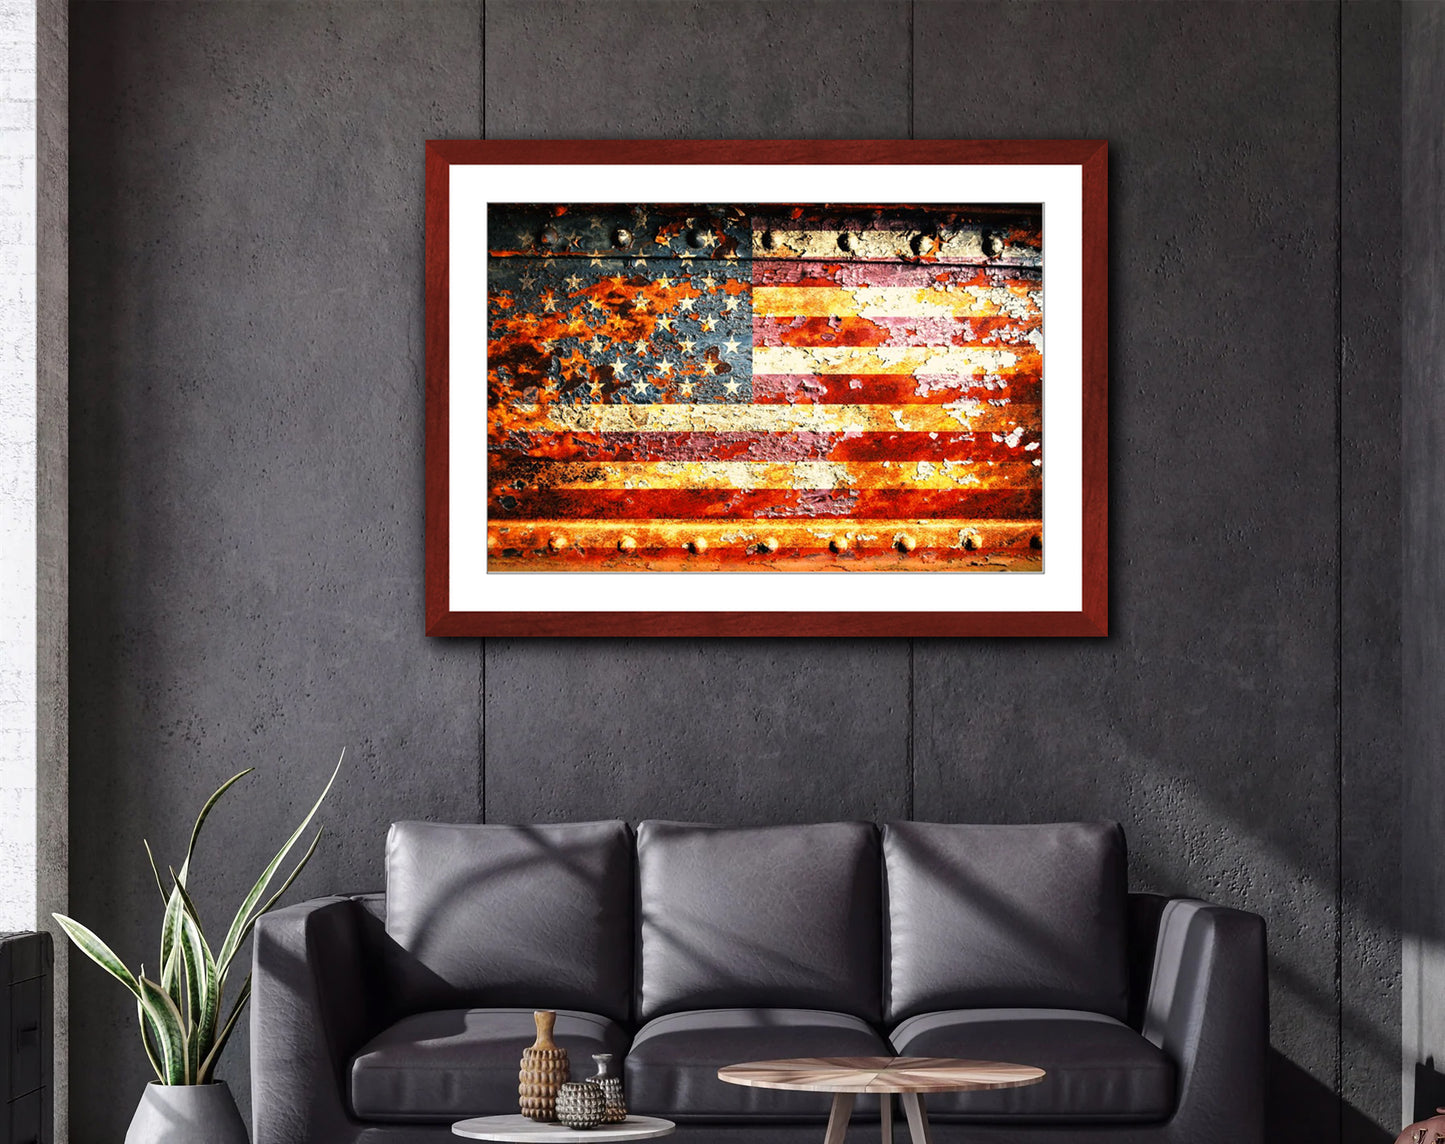 Patriotic Themed Artwork - American Flag On Rusted Riveted Panel Print On Archival Paper Framed In A Cherry Color Wood Frame